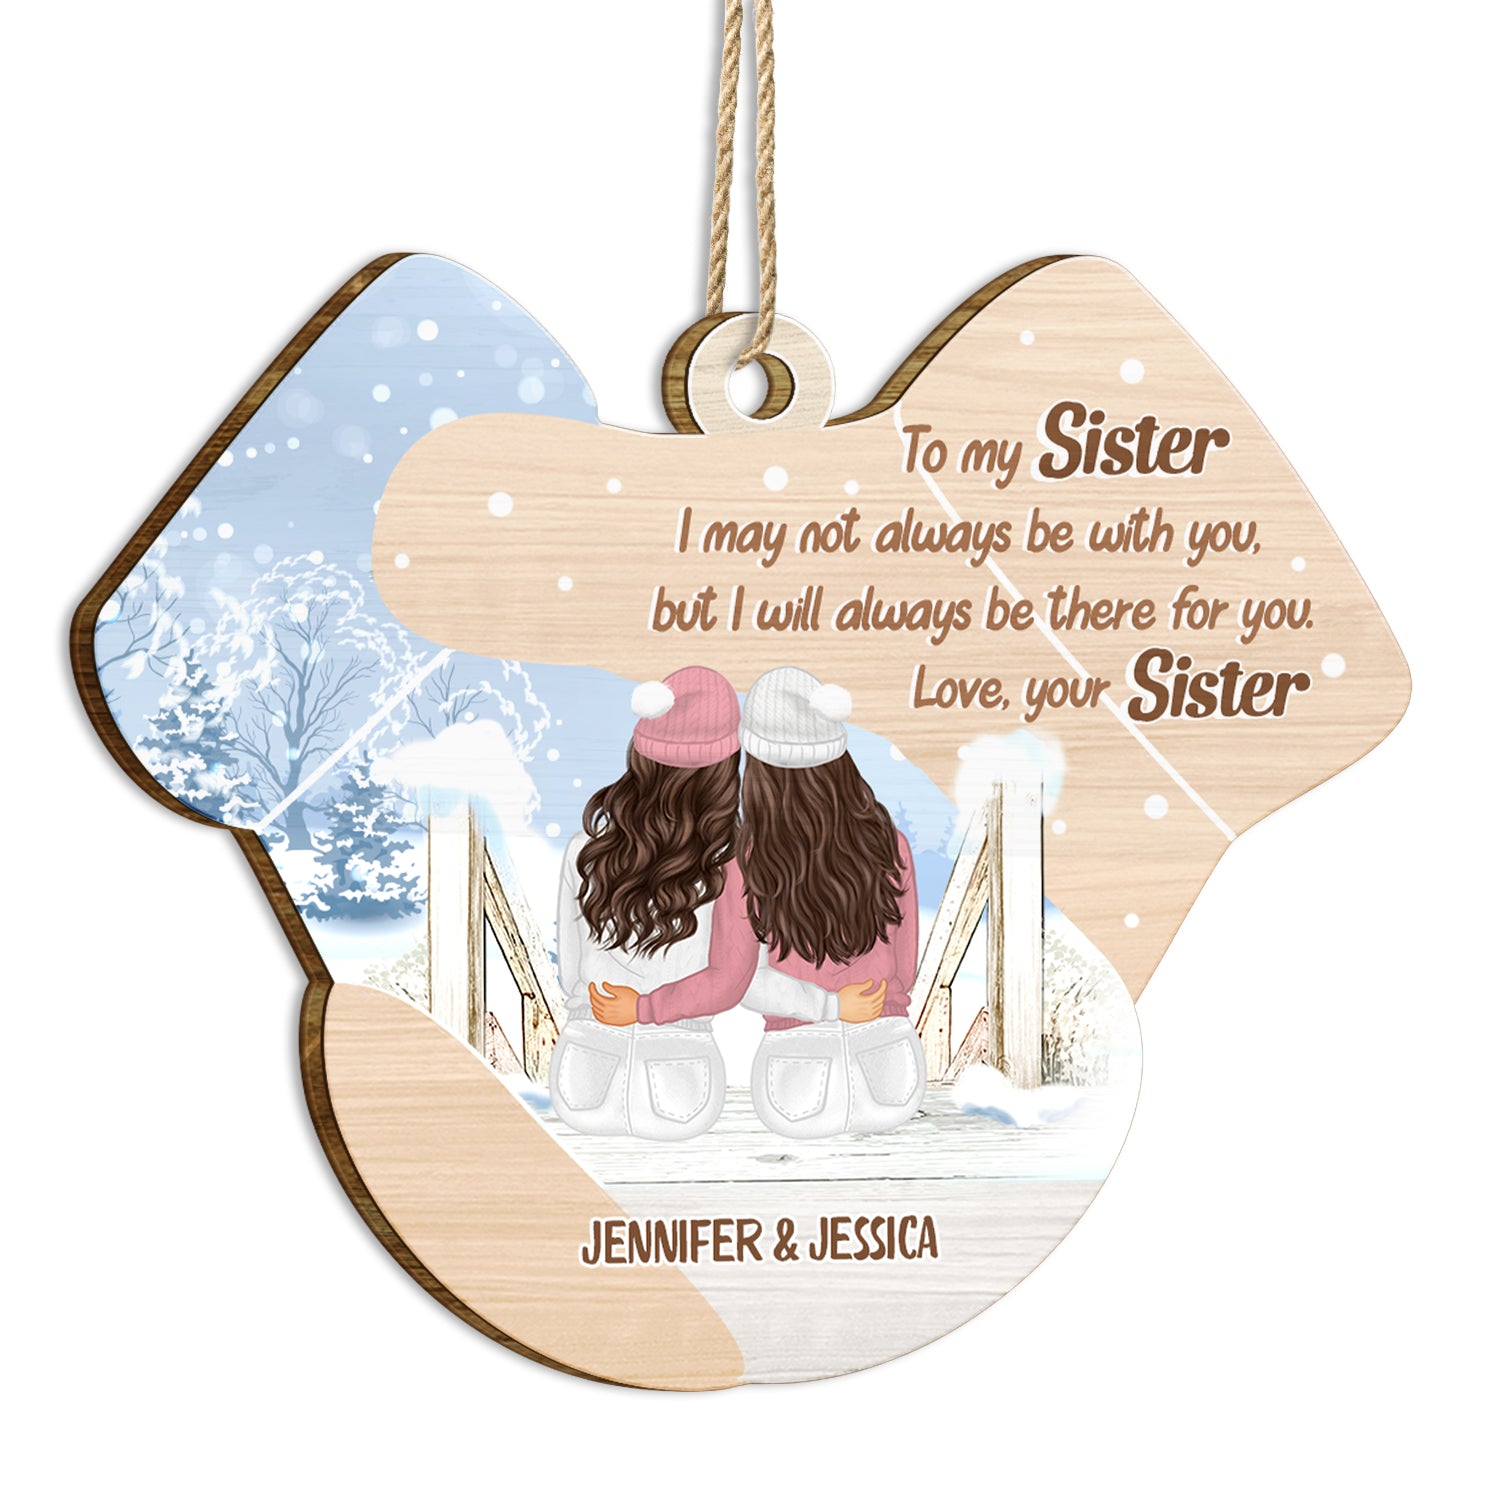 Be There For You - Christmas Gift For Sisters - Personalized Custom Shaped Wooden Ornament